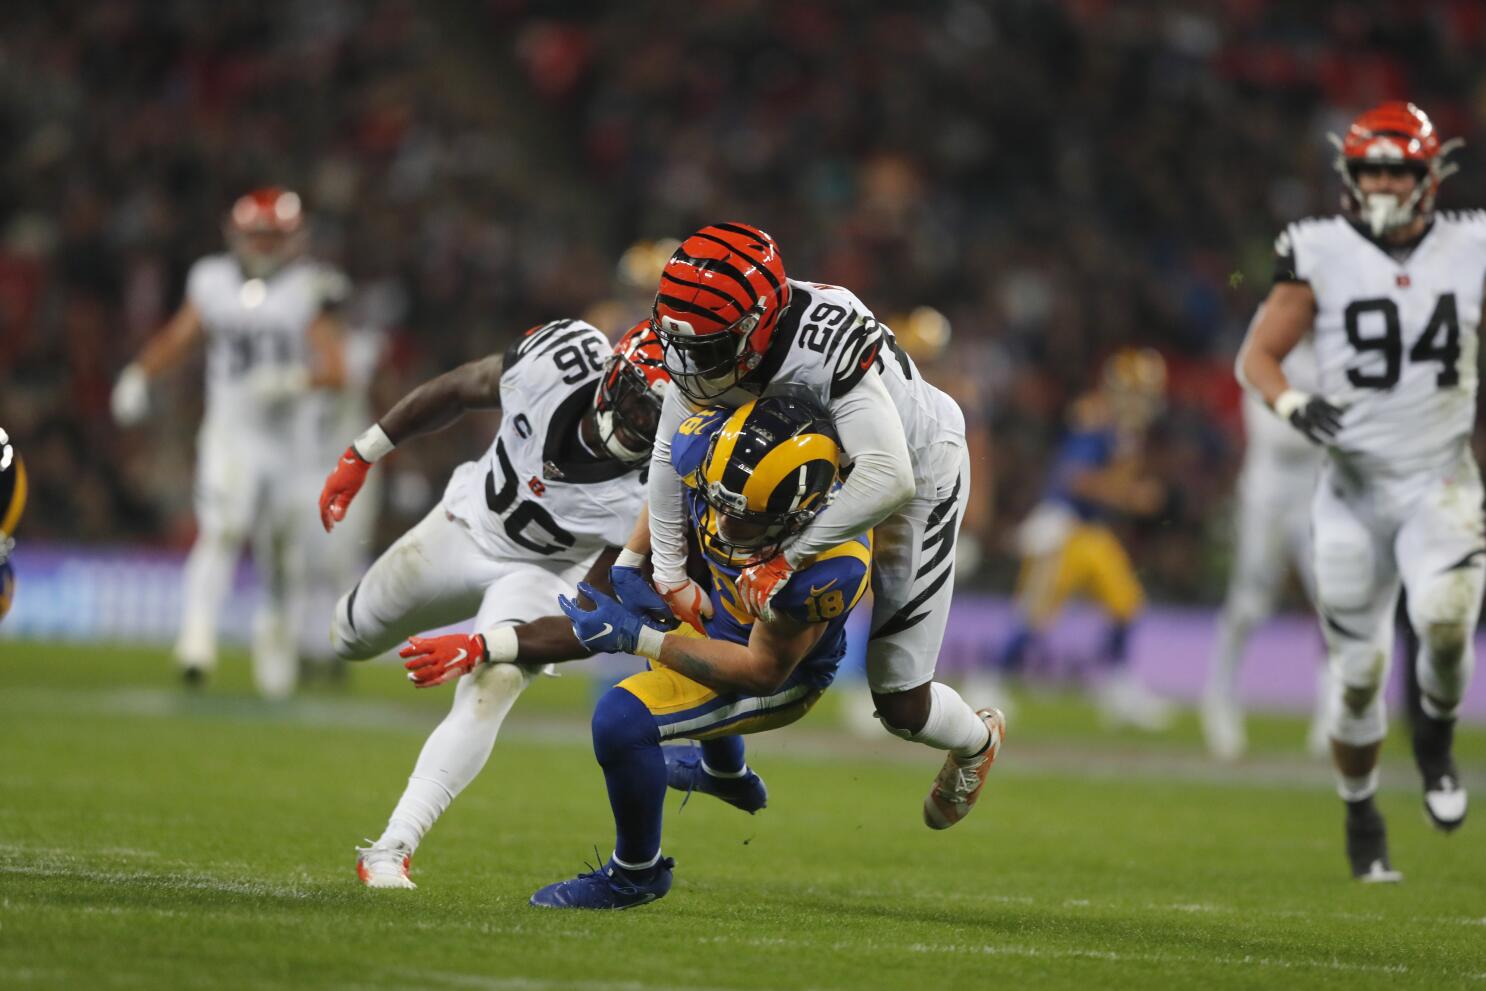 Tom Krasovic: San Marcos' Fred Warner gets a second Super Bowl crack at  Patrick Mahomes, Chiefs - The San Diego Union-Tribune